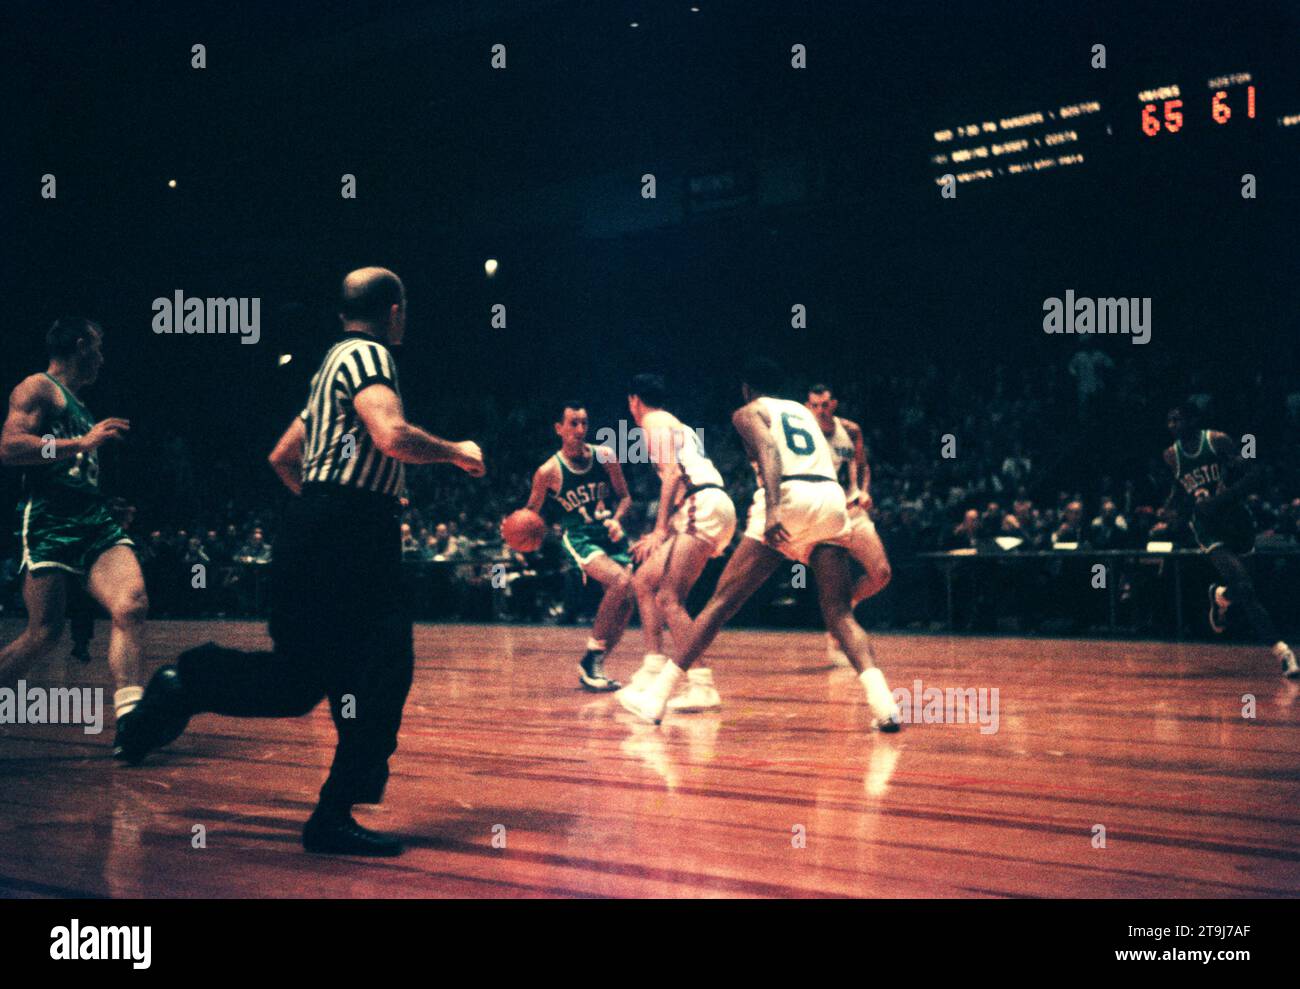 NEW YORK, NY - OCTOBER 25: Bob Cousy #14 of the Boston Celtics dribbles during an NBA game against the New York Knicks on October 25, 1958 at the Madison Square Garden in New York, New York.  (Photo by Hy Peskin) *** Local Caption *** Bob Cousy Stock Photo